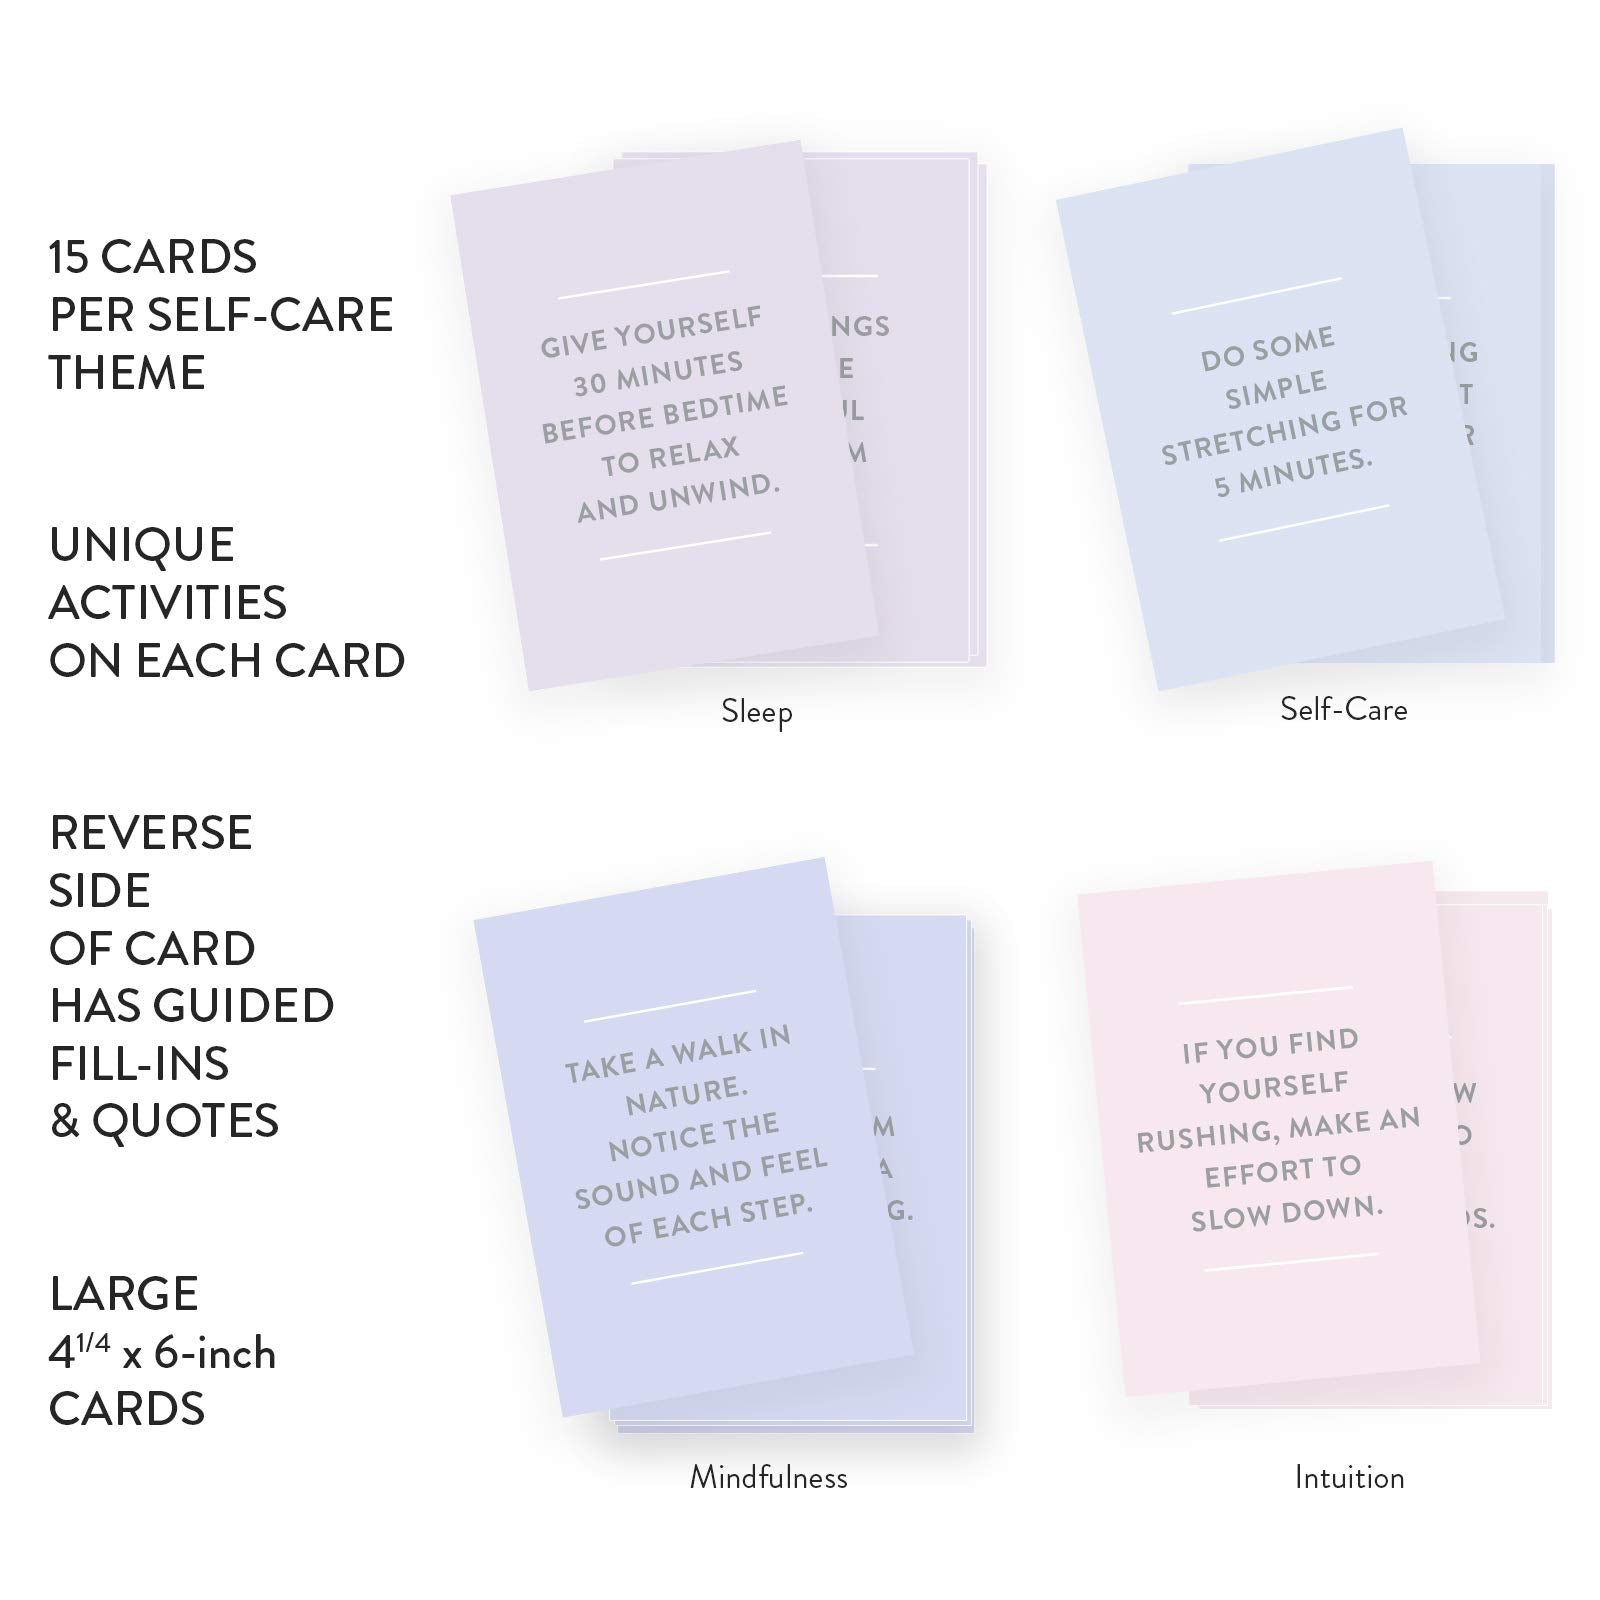 Mindfulness Cards in Eccolo Wellness Box